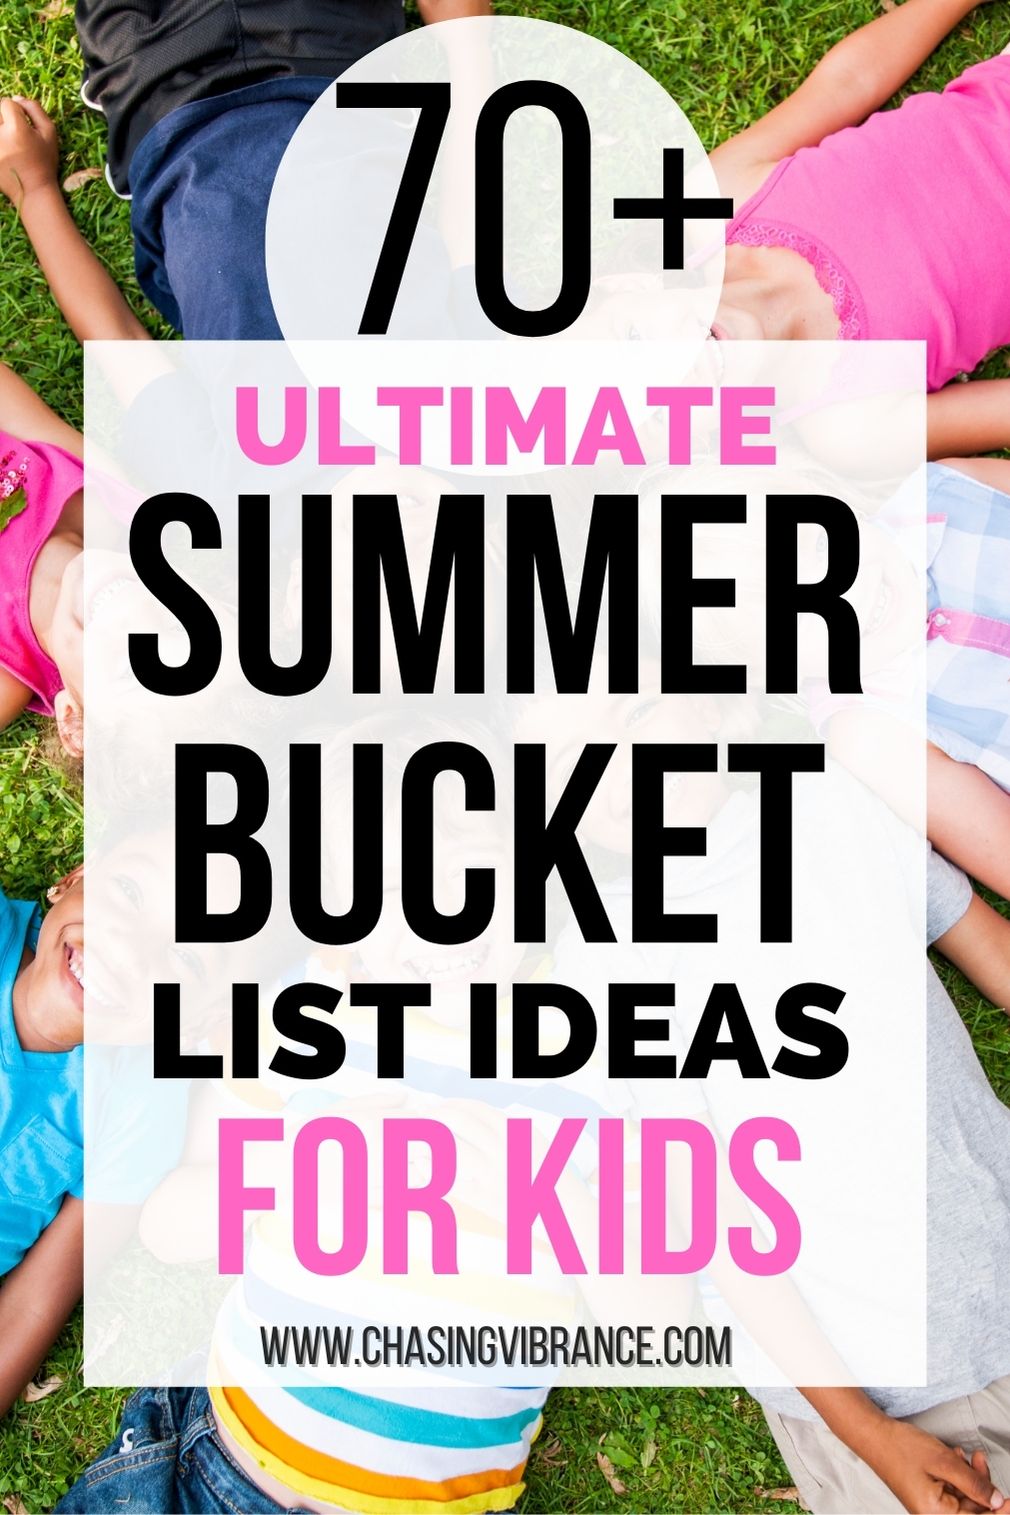 circle of kids in brightly colored shirts like on the grass looking up. Text overlay says: 70+ ultimate summer bucket list ideas for kids